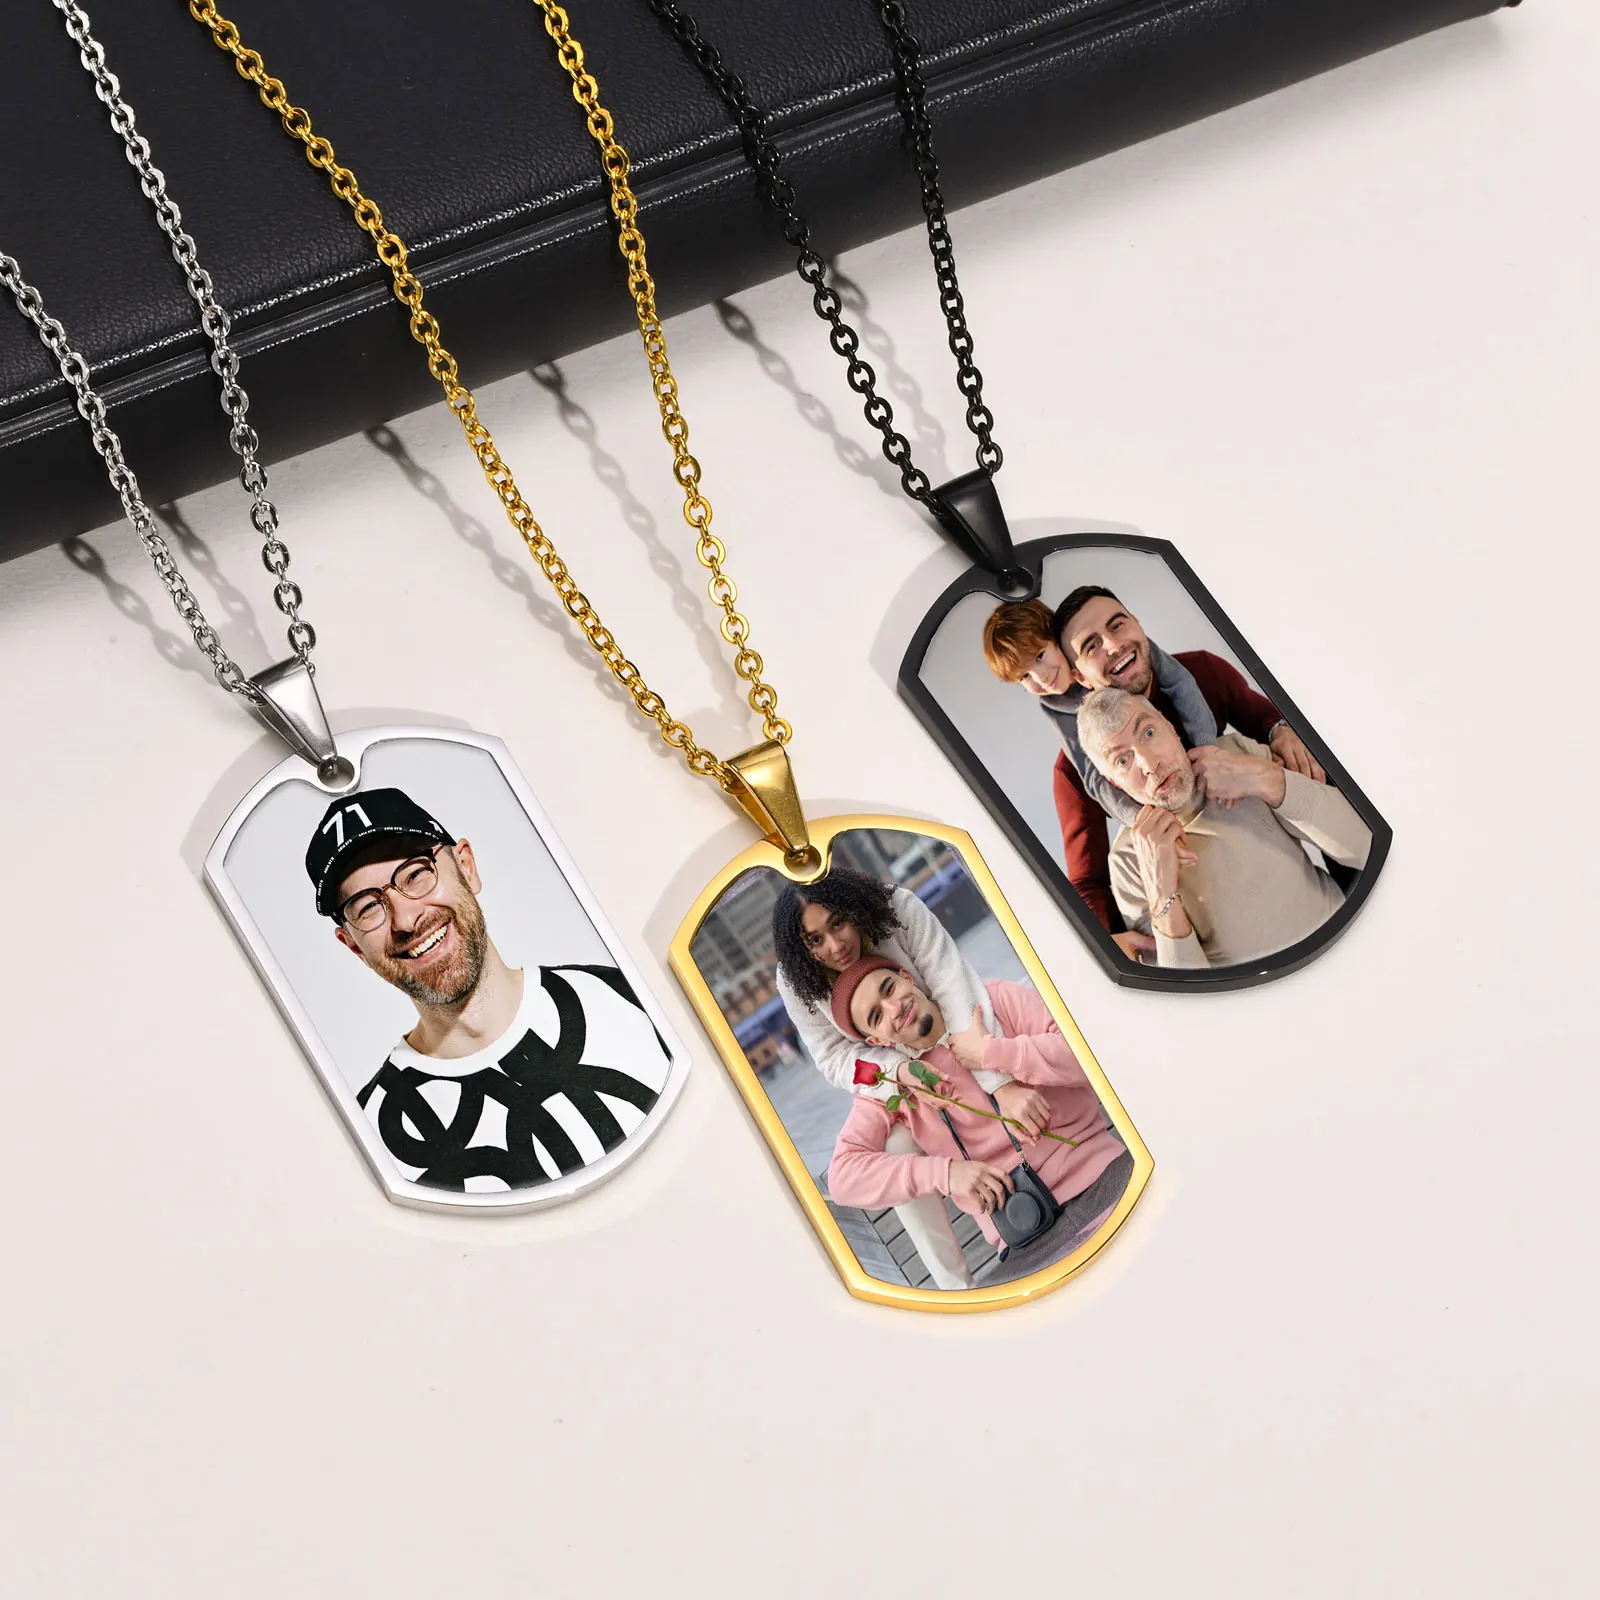 Men Personalize Engrave Name Custom The Photo of Family Pendant Necklaces,Picture Words Date Pendant Dogtag,Love Keepsake Gifts private order personality mother s bracelet picture customization baby child dad mom brothers sisters handmade family photo